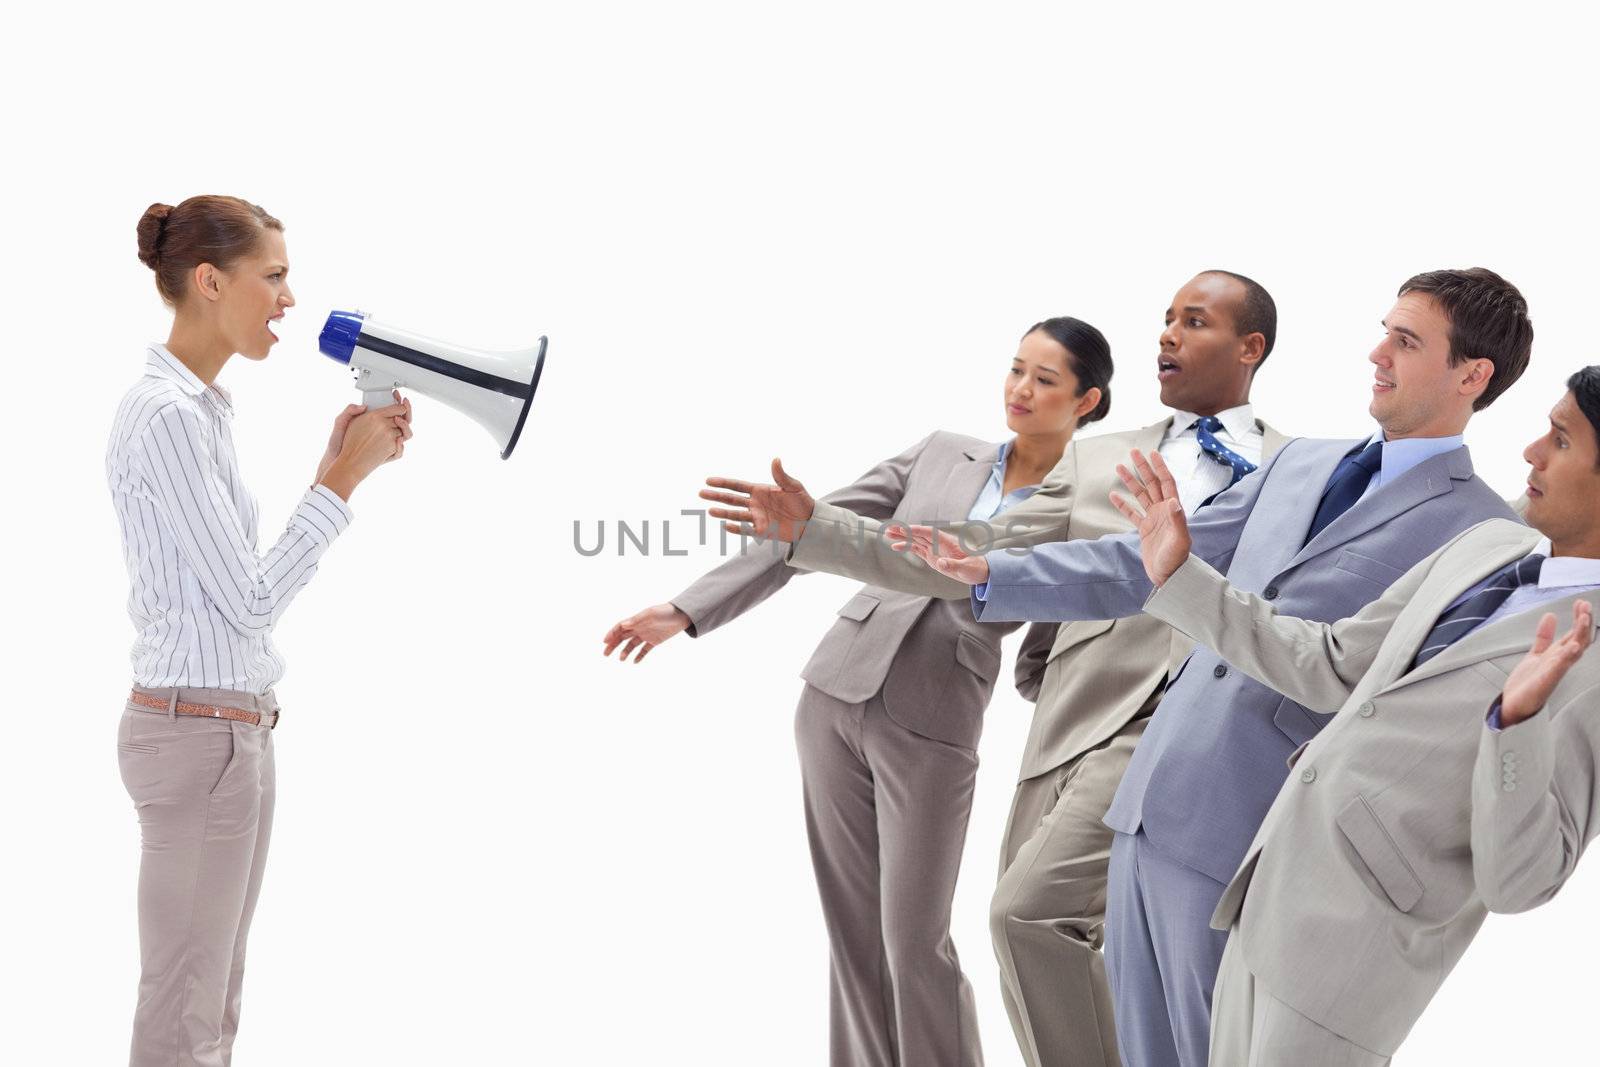 Woman yelling at people dressed in suits through a megaphone by Wavebreakmedia